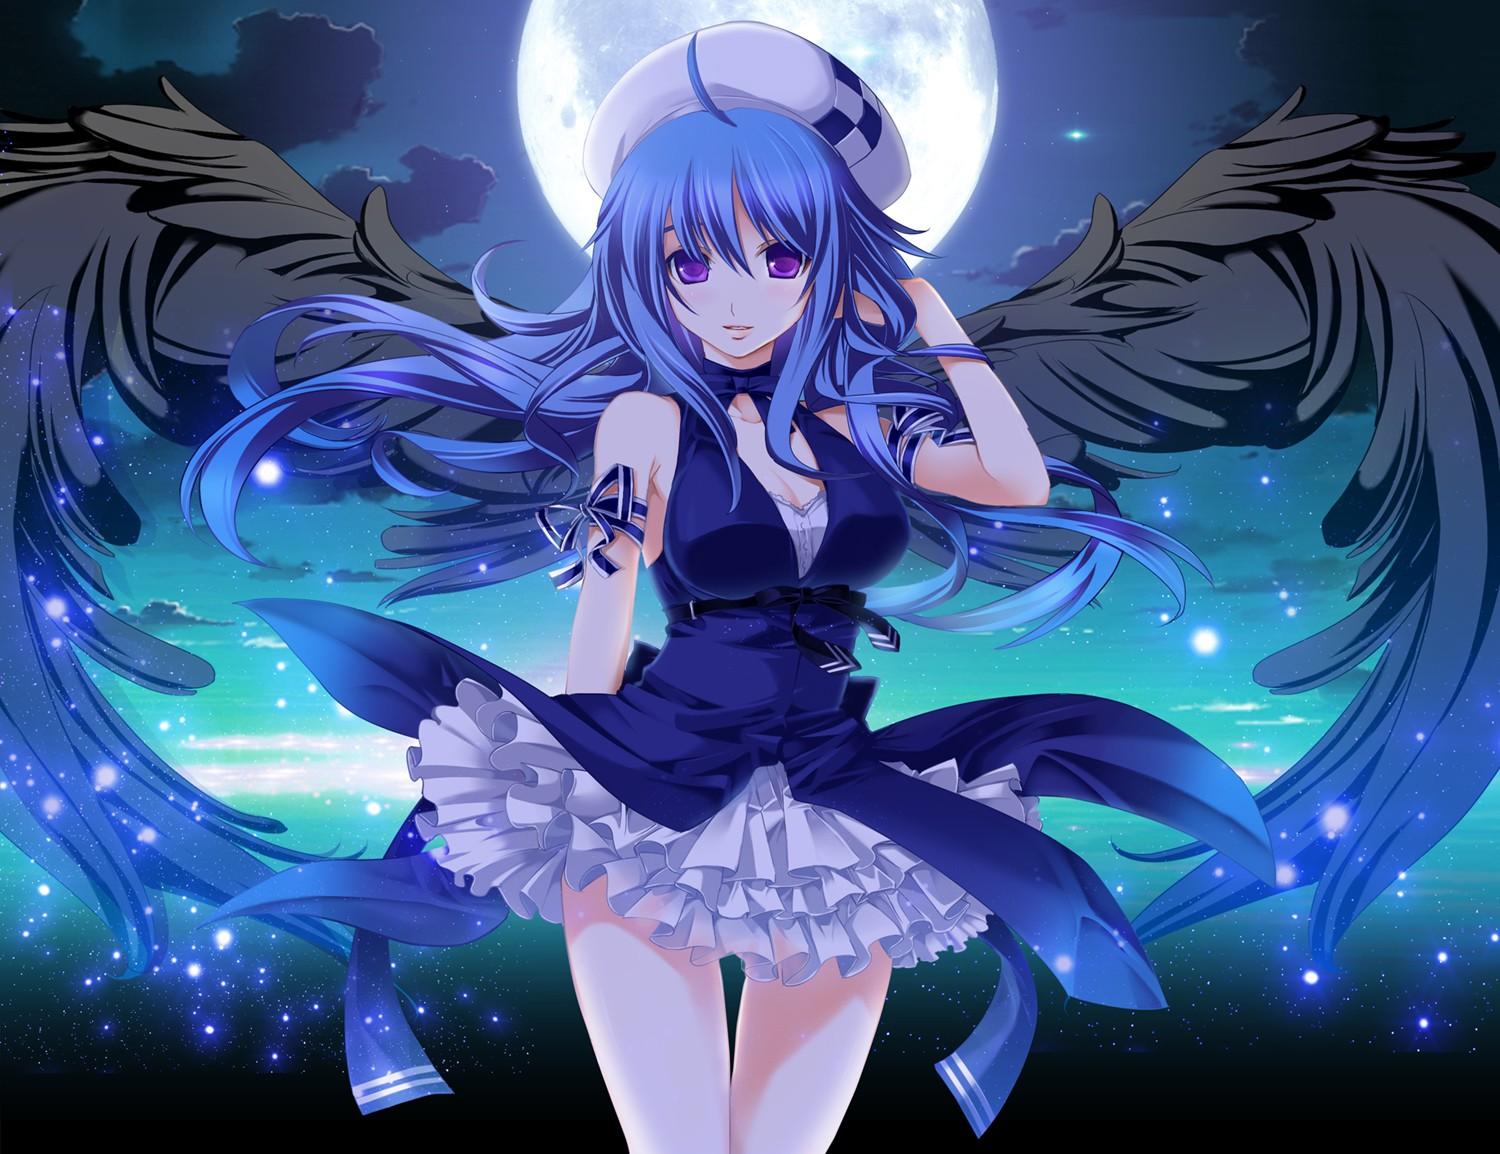 Anime girl with blue hair and wings - wide 3